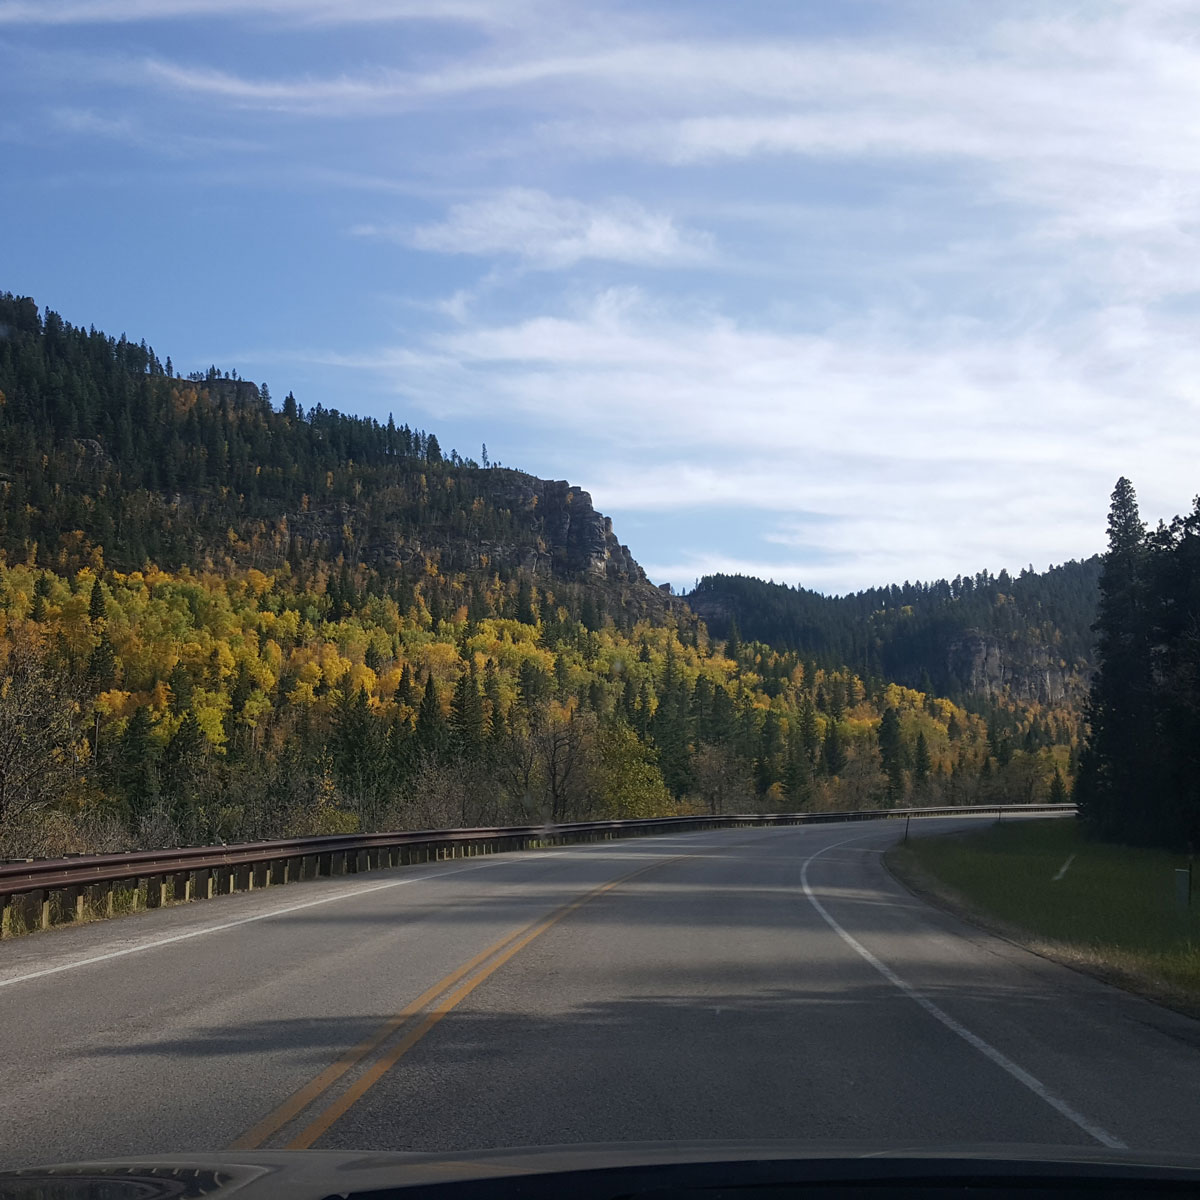 A windshield view of Spearfish Canyon Highway. A curve in the road leads right acccompanied by a guardrail while the beautiful Autumn colors in the canyon trees stand on the hills beyond.